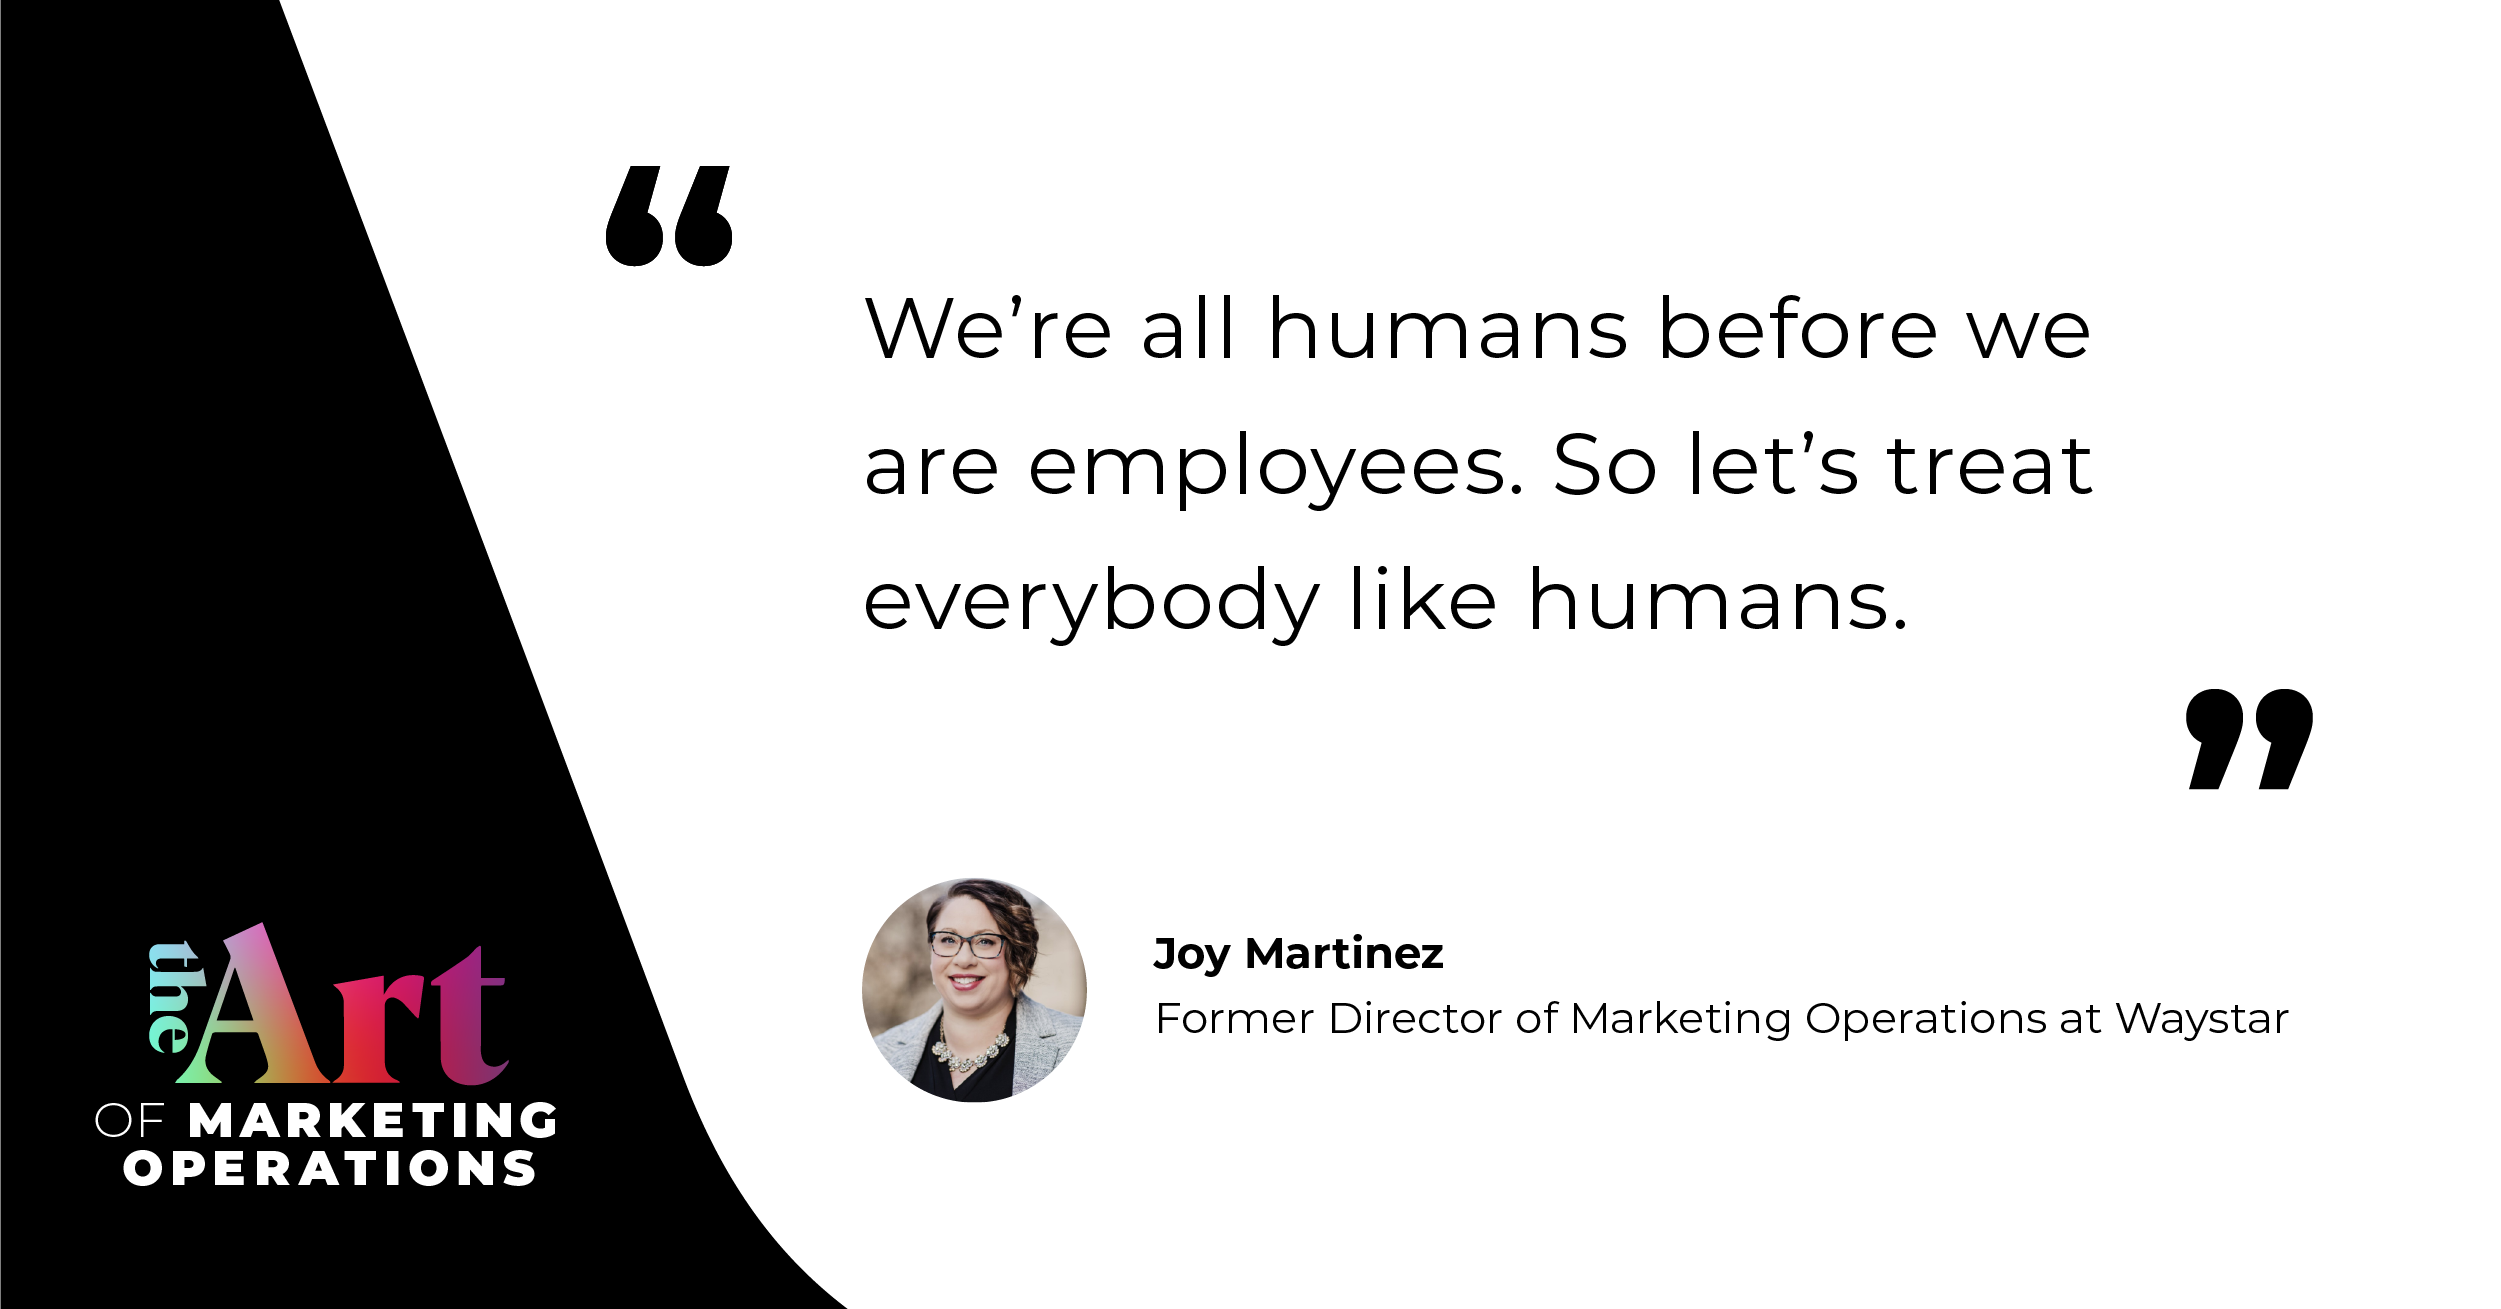 “We're all humans before we are employees. So let's treat everybody like humans.”— Joy Martinez